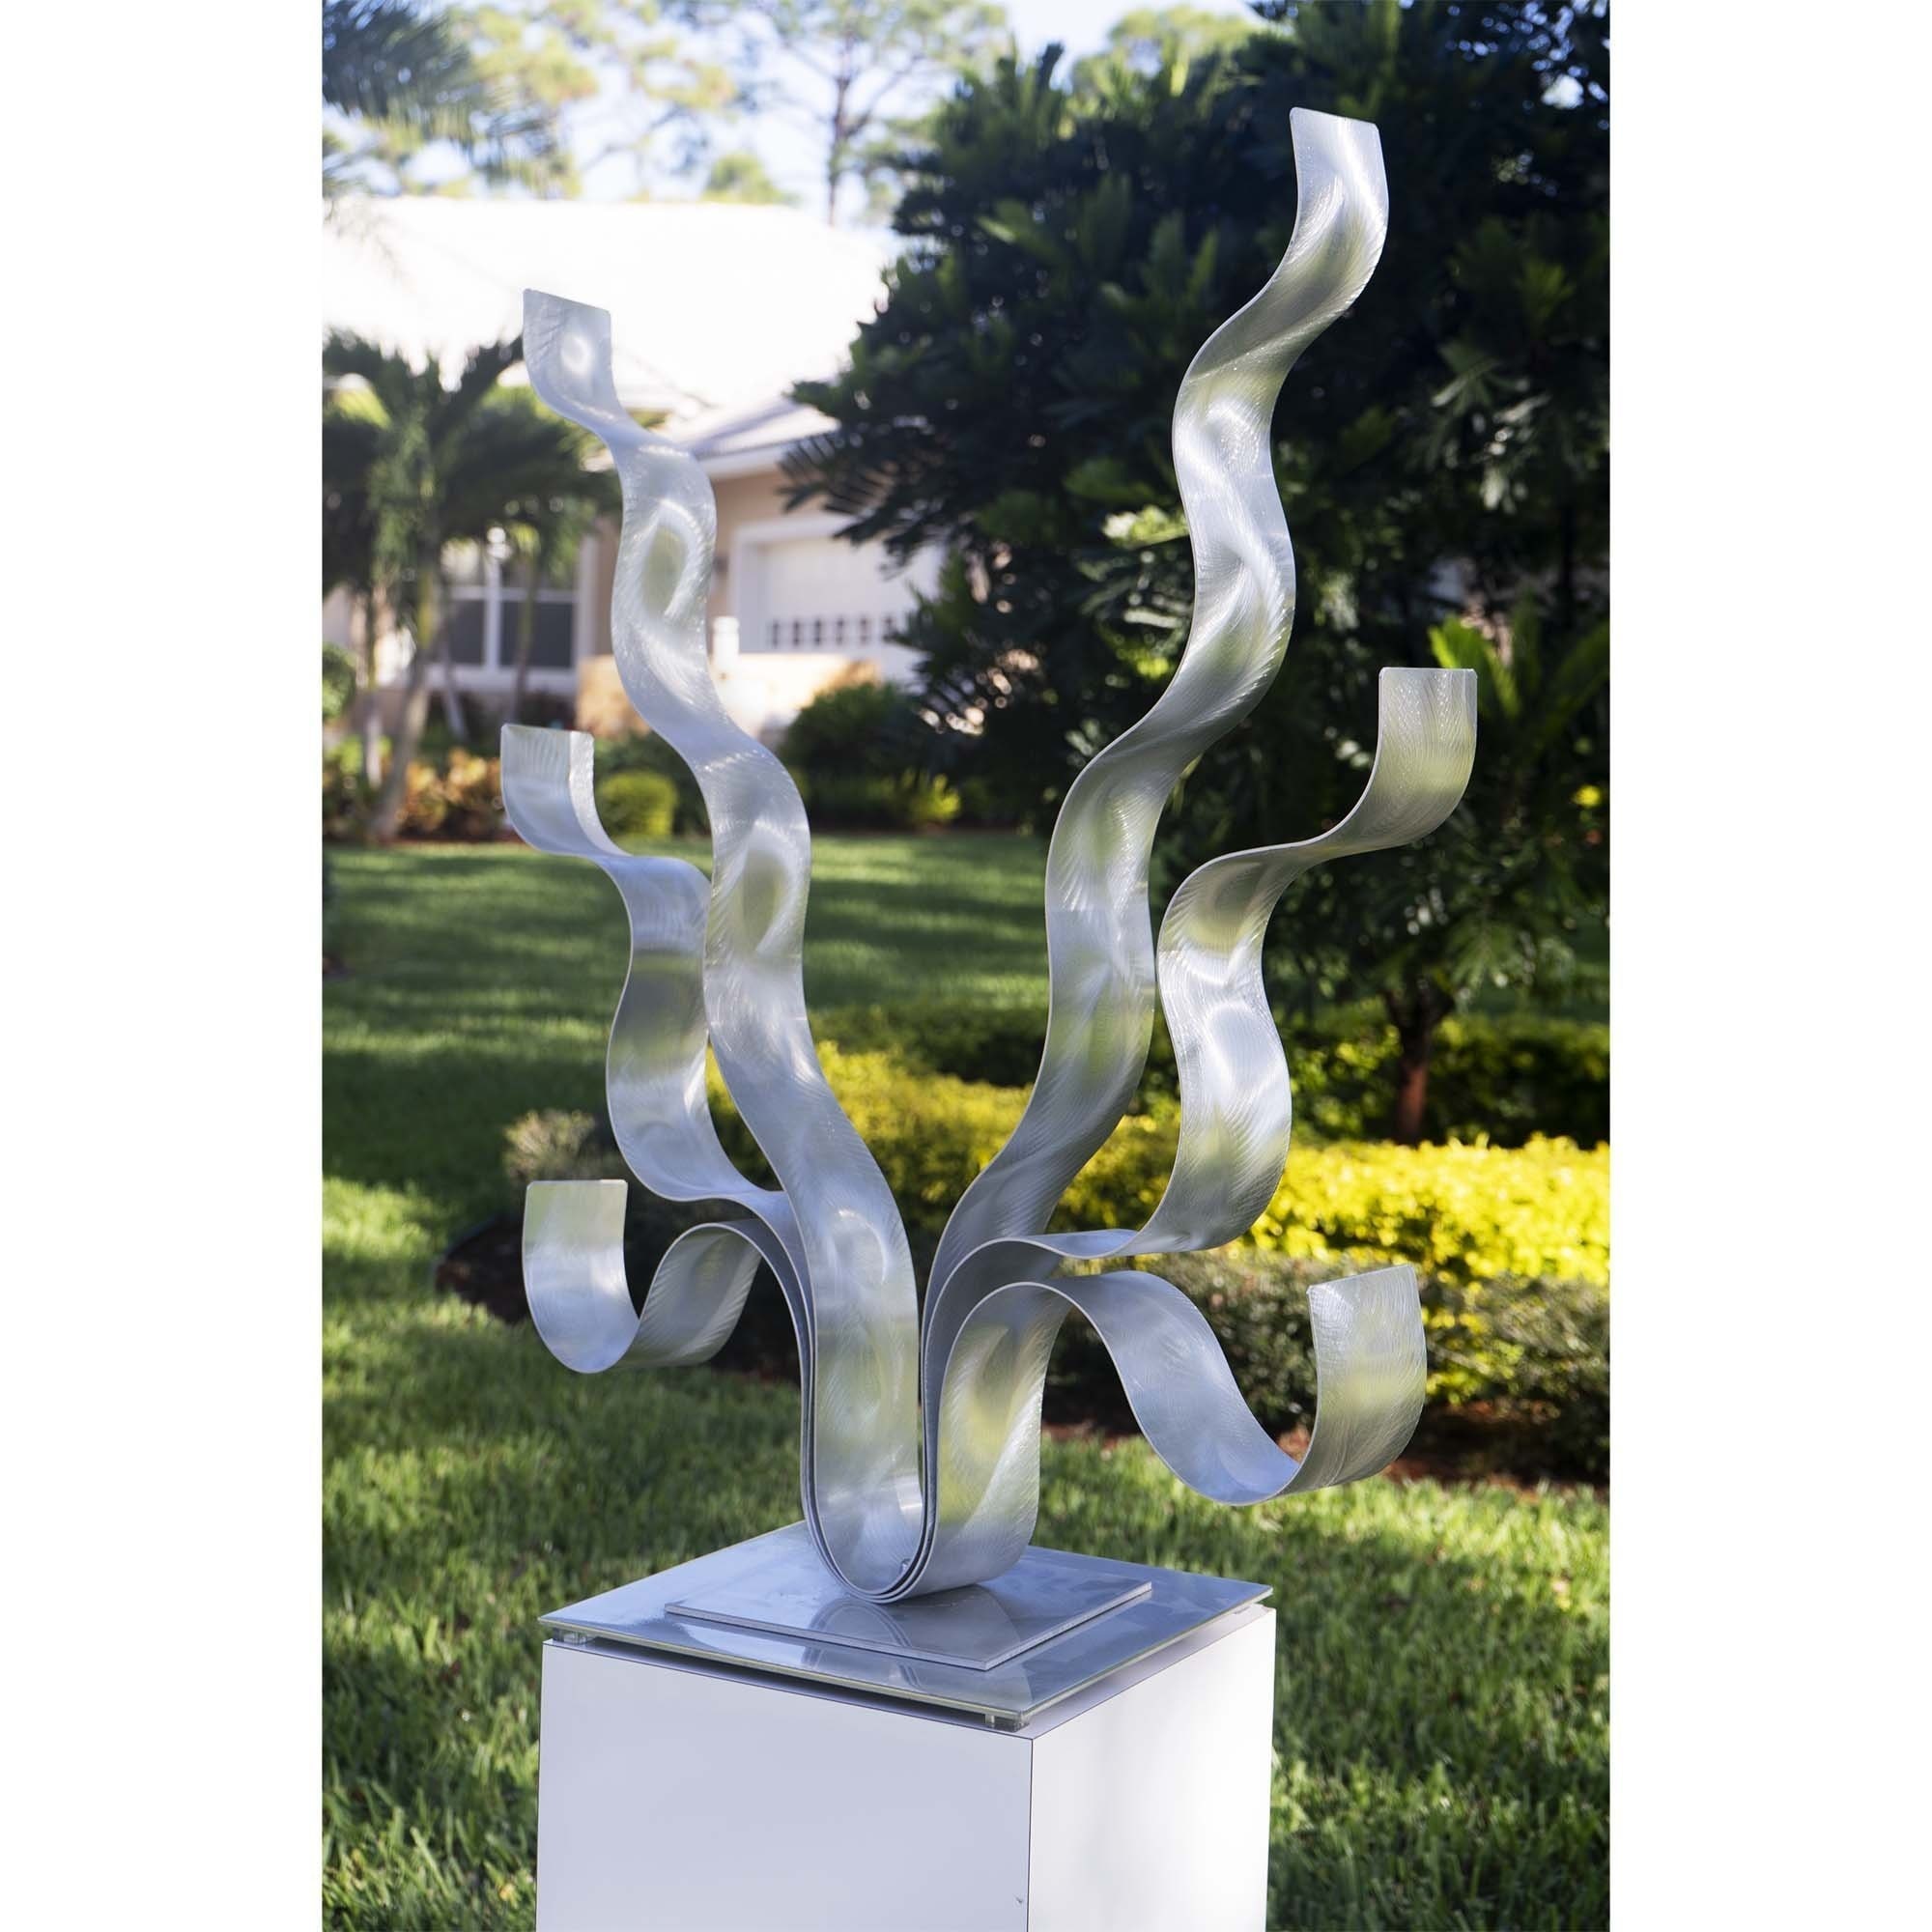 https://ak1.ostkcdn.com/images/products/is/images/direct/1872c6dafa65572ddea837fcfed47286b55c1620/Statements2000-Modern-Metal-Art-Sculpture-Abstract-Indoor-Outdoor-Decor-by-Jon-Allen---Reaching-Out-Flat-Base.jpg